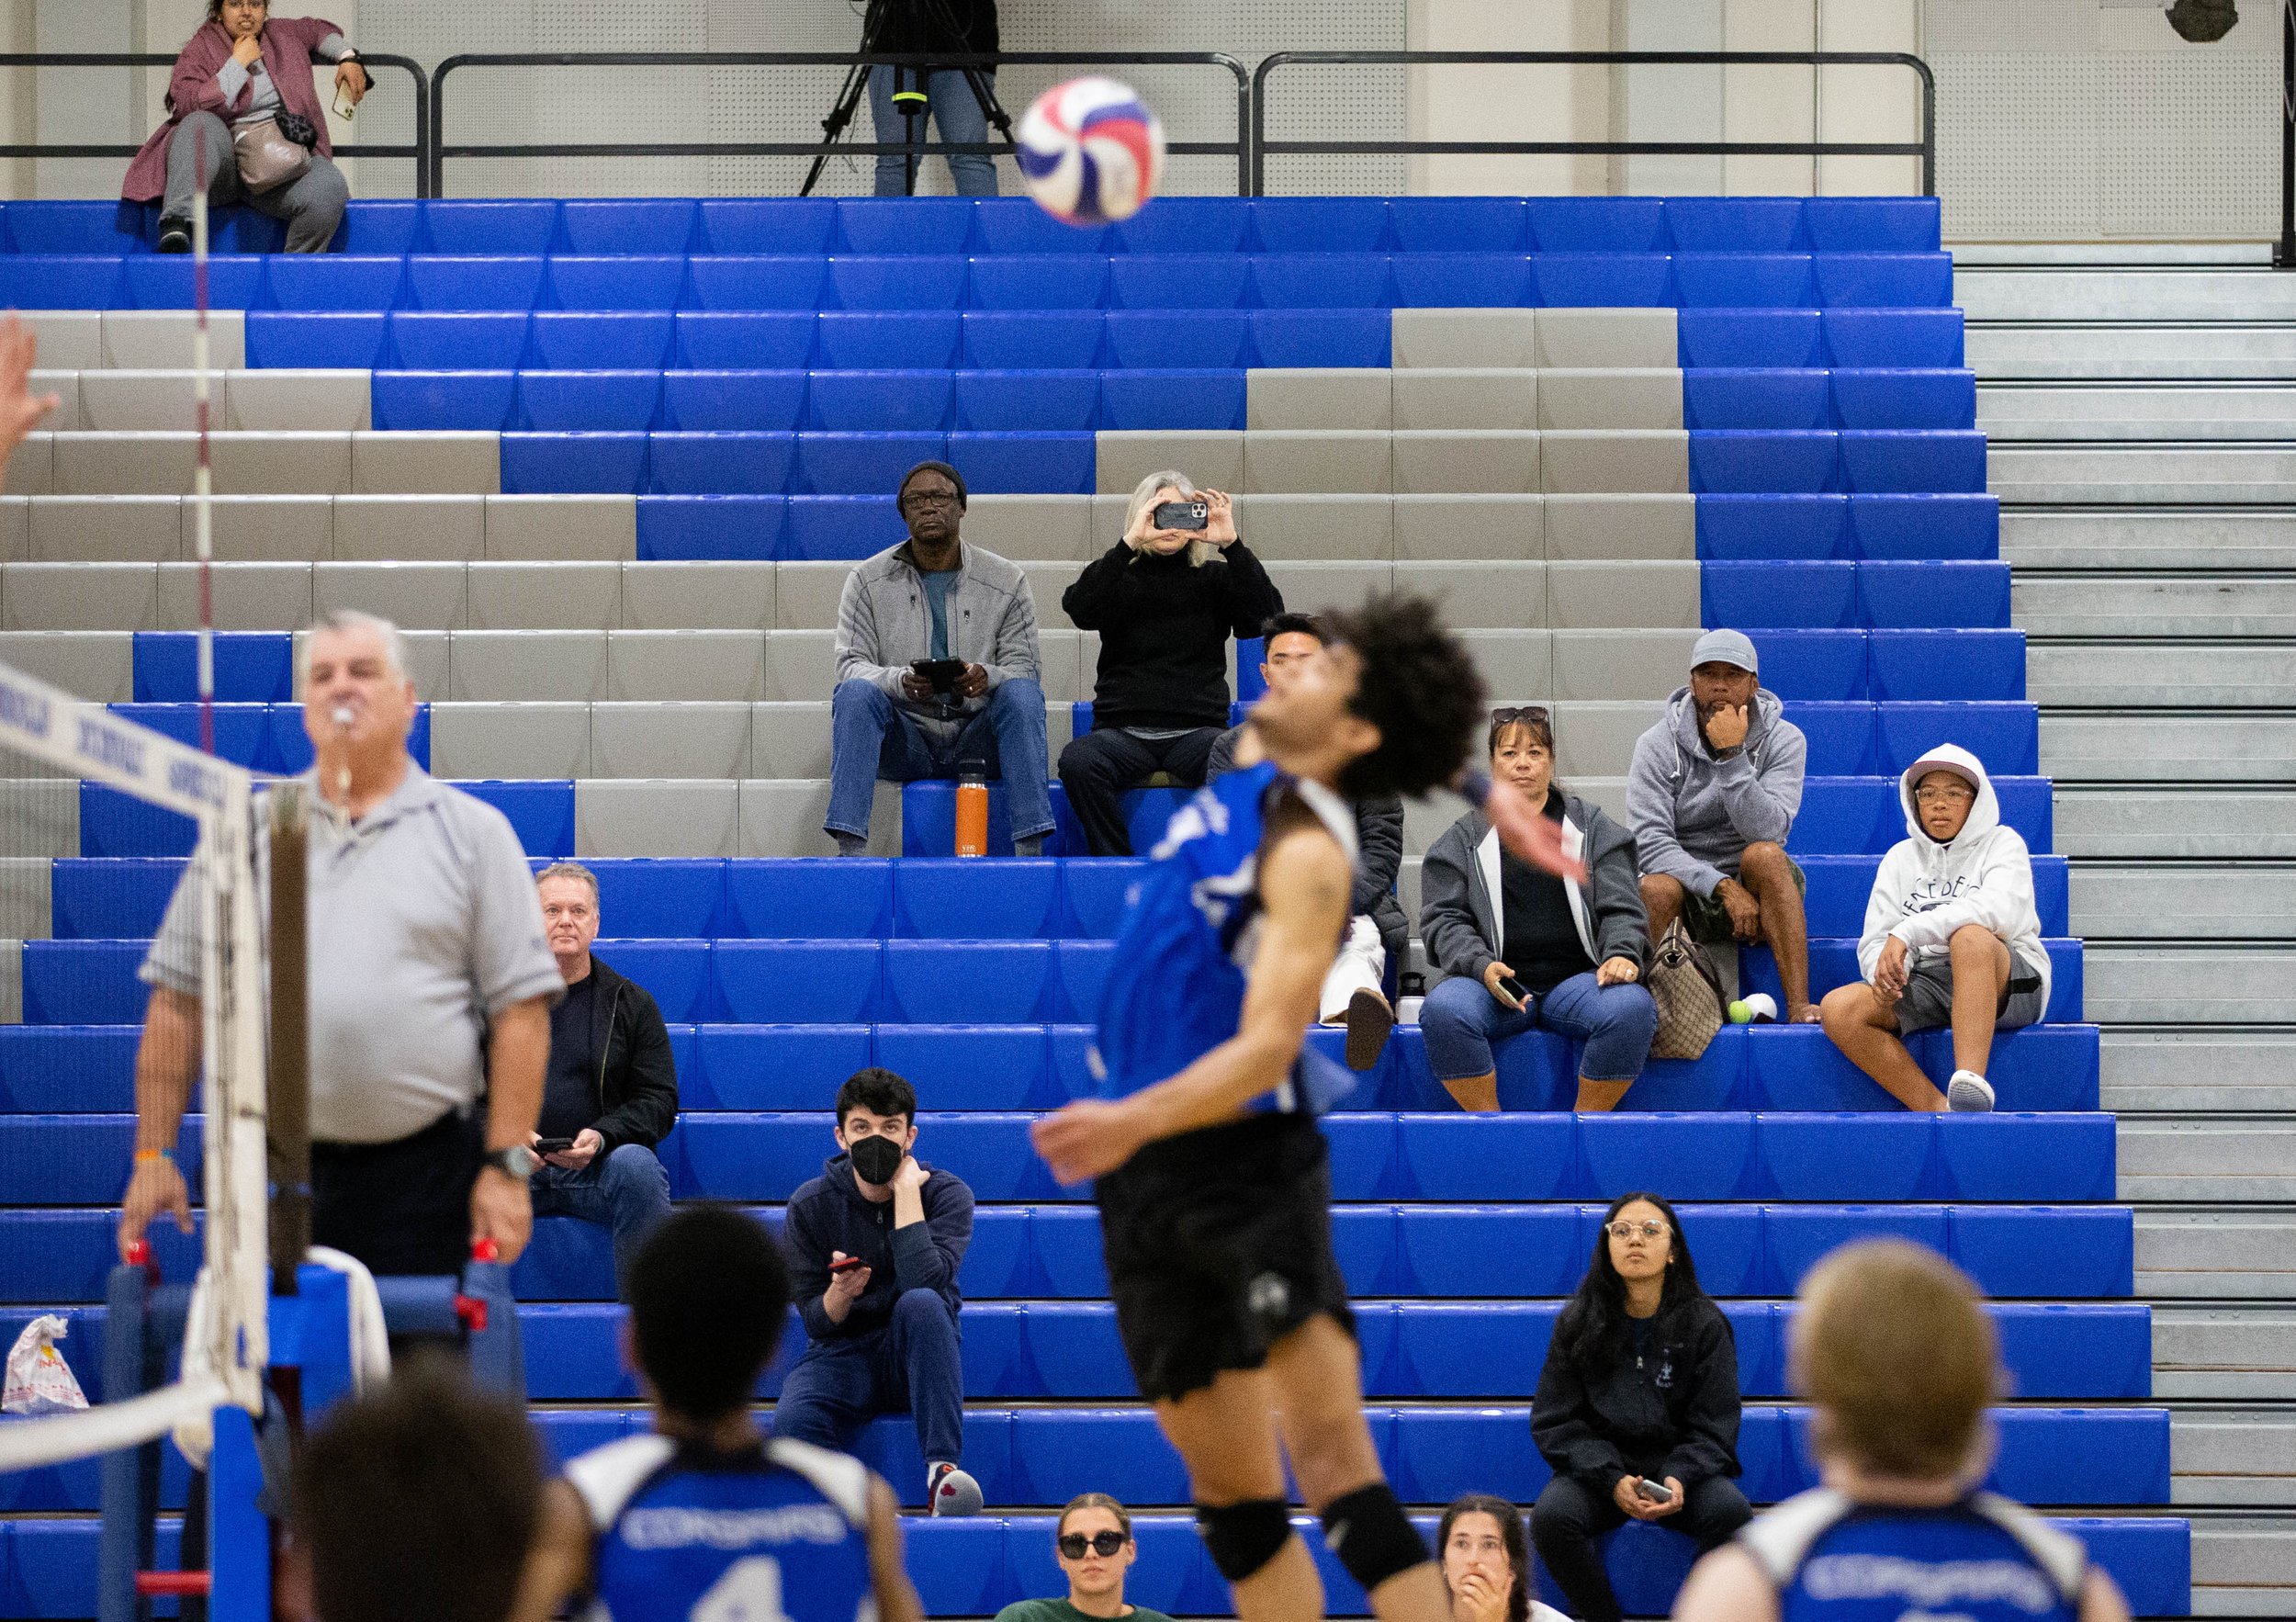  Attendees of the men's volleyball game between the Santa Monica College(SMC) Corsairs and L.A. Pierce College Brahma BUll watching Nate Davis(10) jump for a "kill" to end the game with the Corsairs taking the win on Wed. March 15, 2023 in the SMC Pa